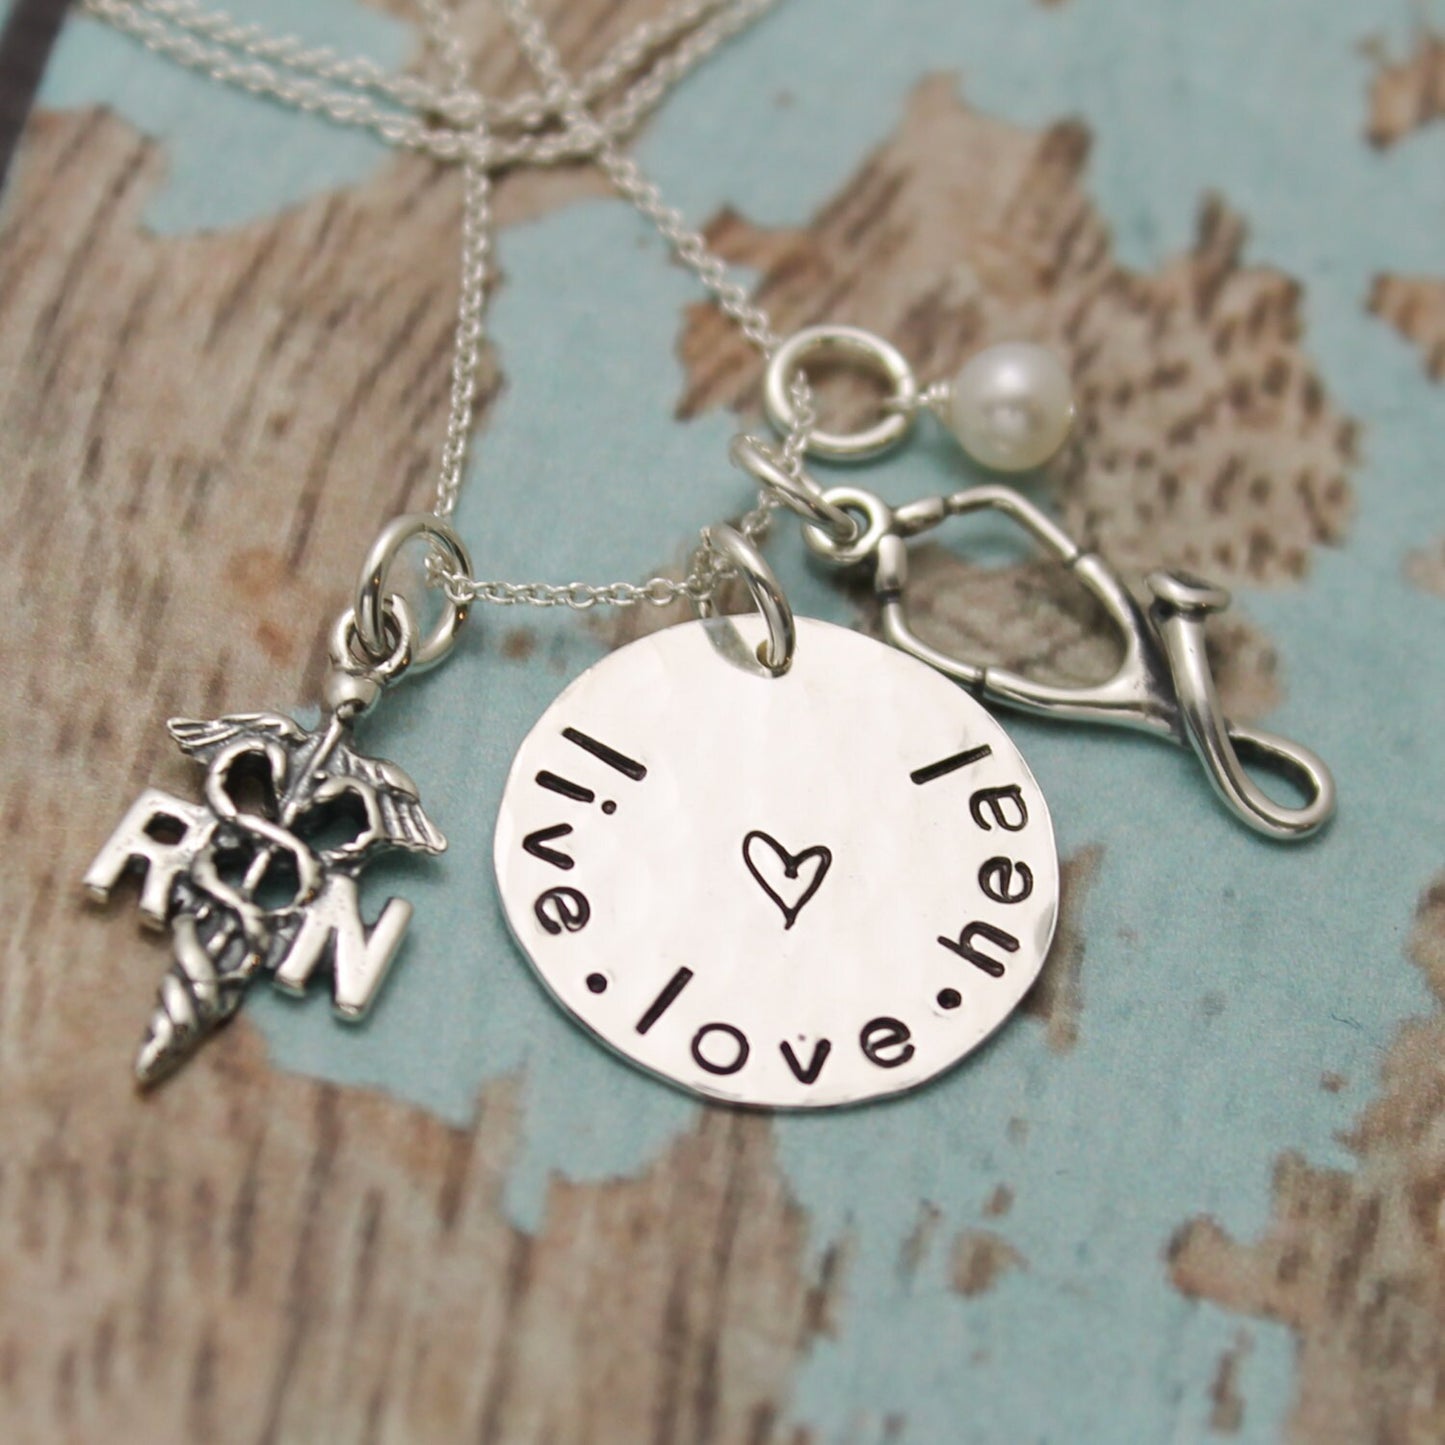 Live Love Heal RN Nurse Necklace RN LPN Nurse Personalized Nurse Jewelry Gift Hand Stamped Sterling Silver